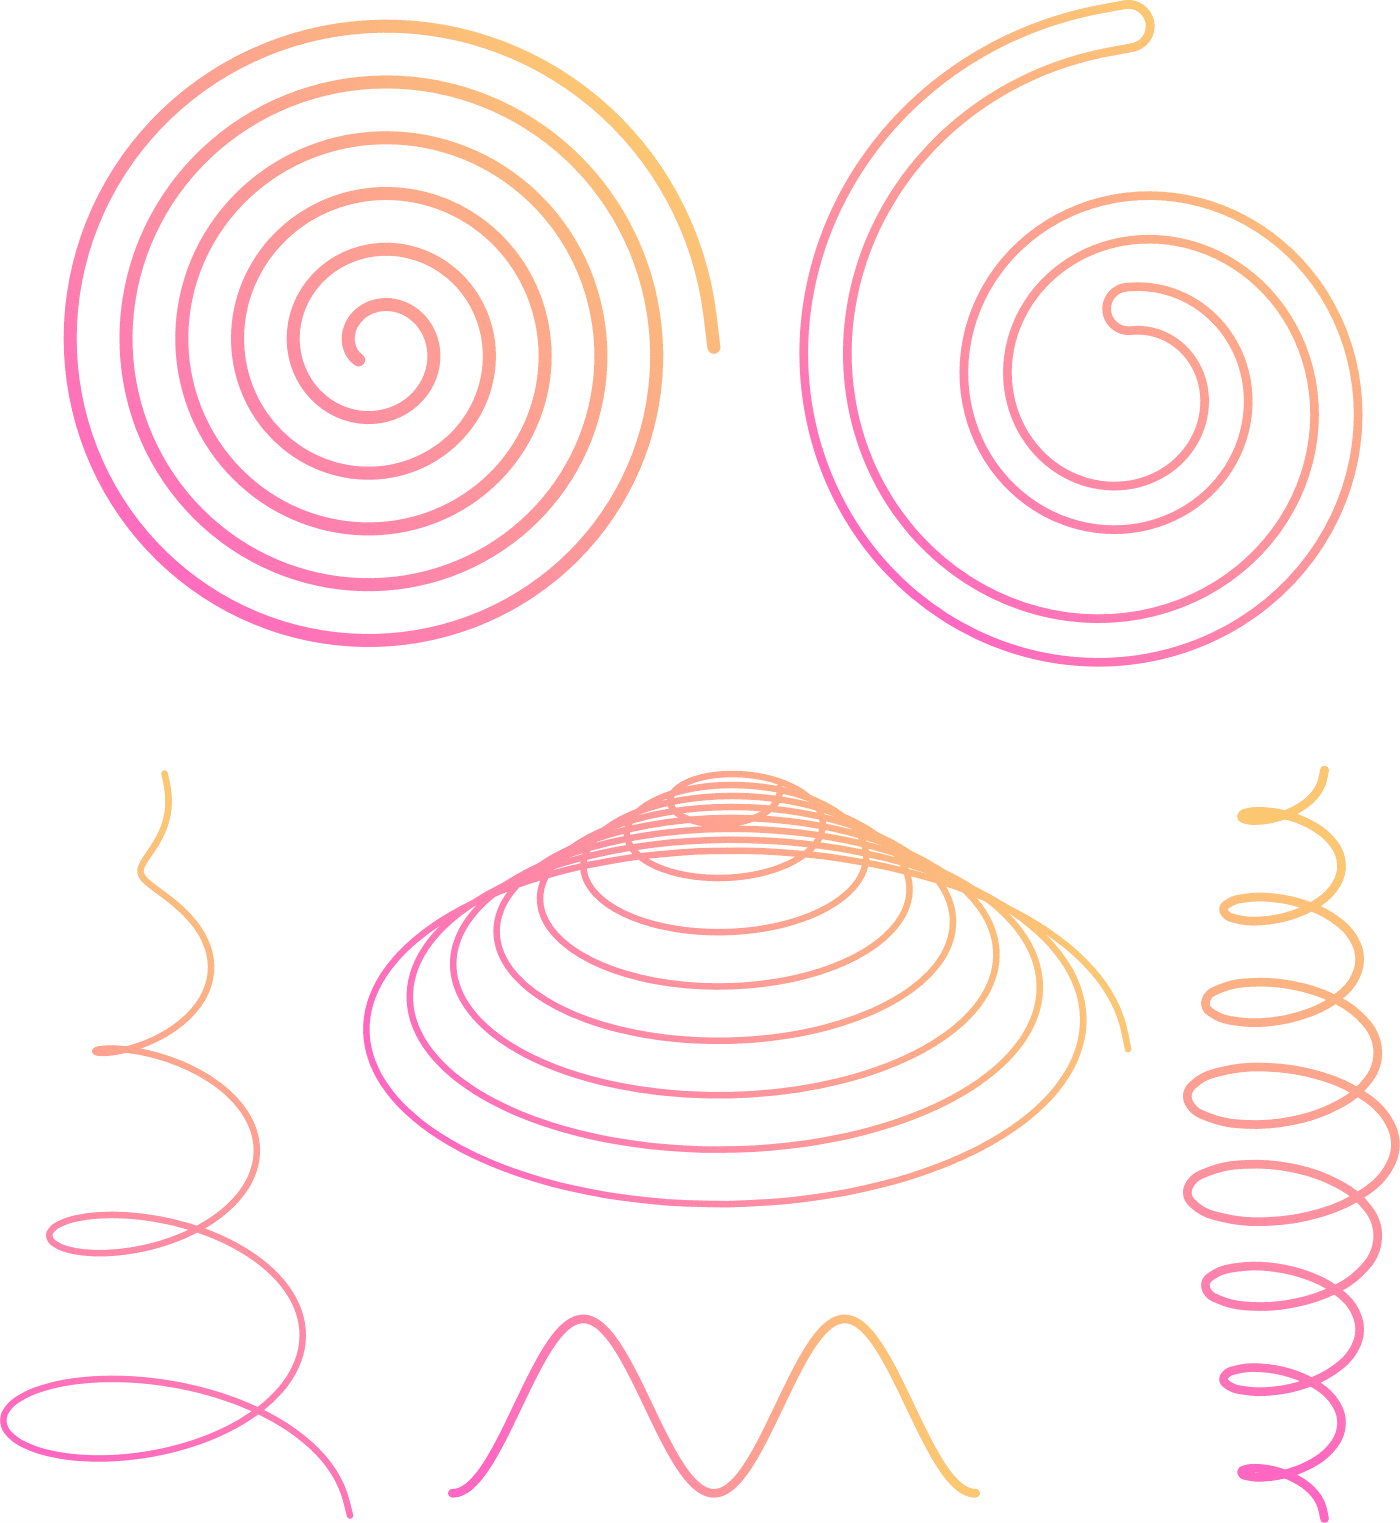 You can now easily draw beautiful spiral and helix shapes in Sketch